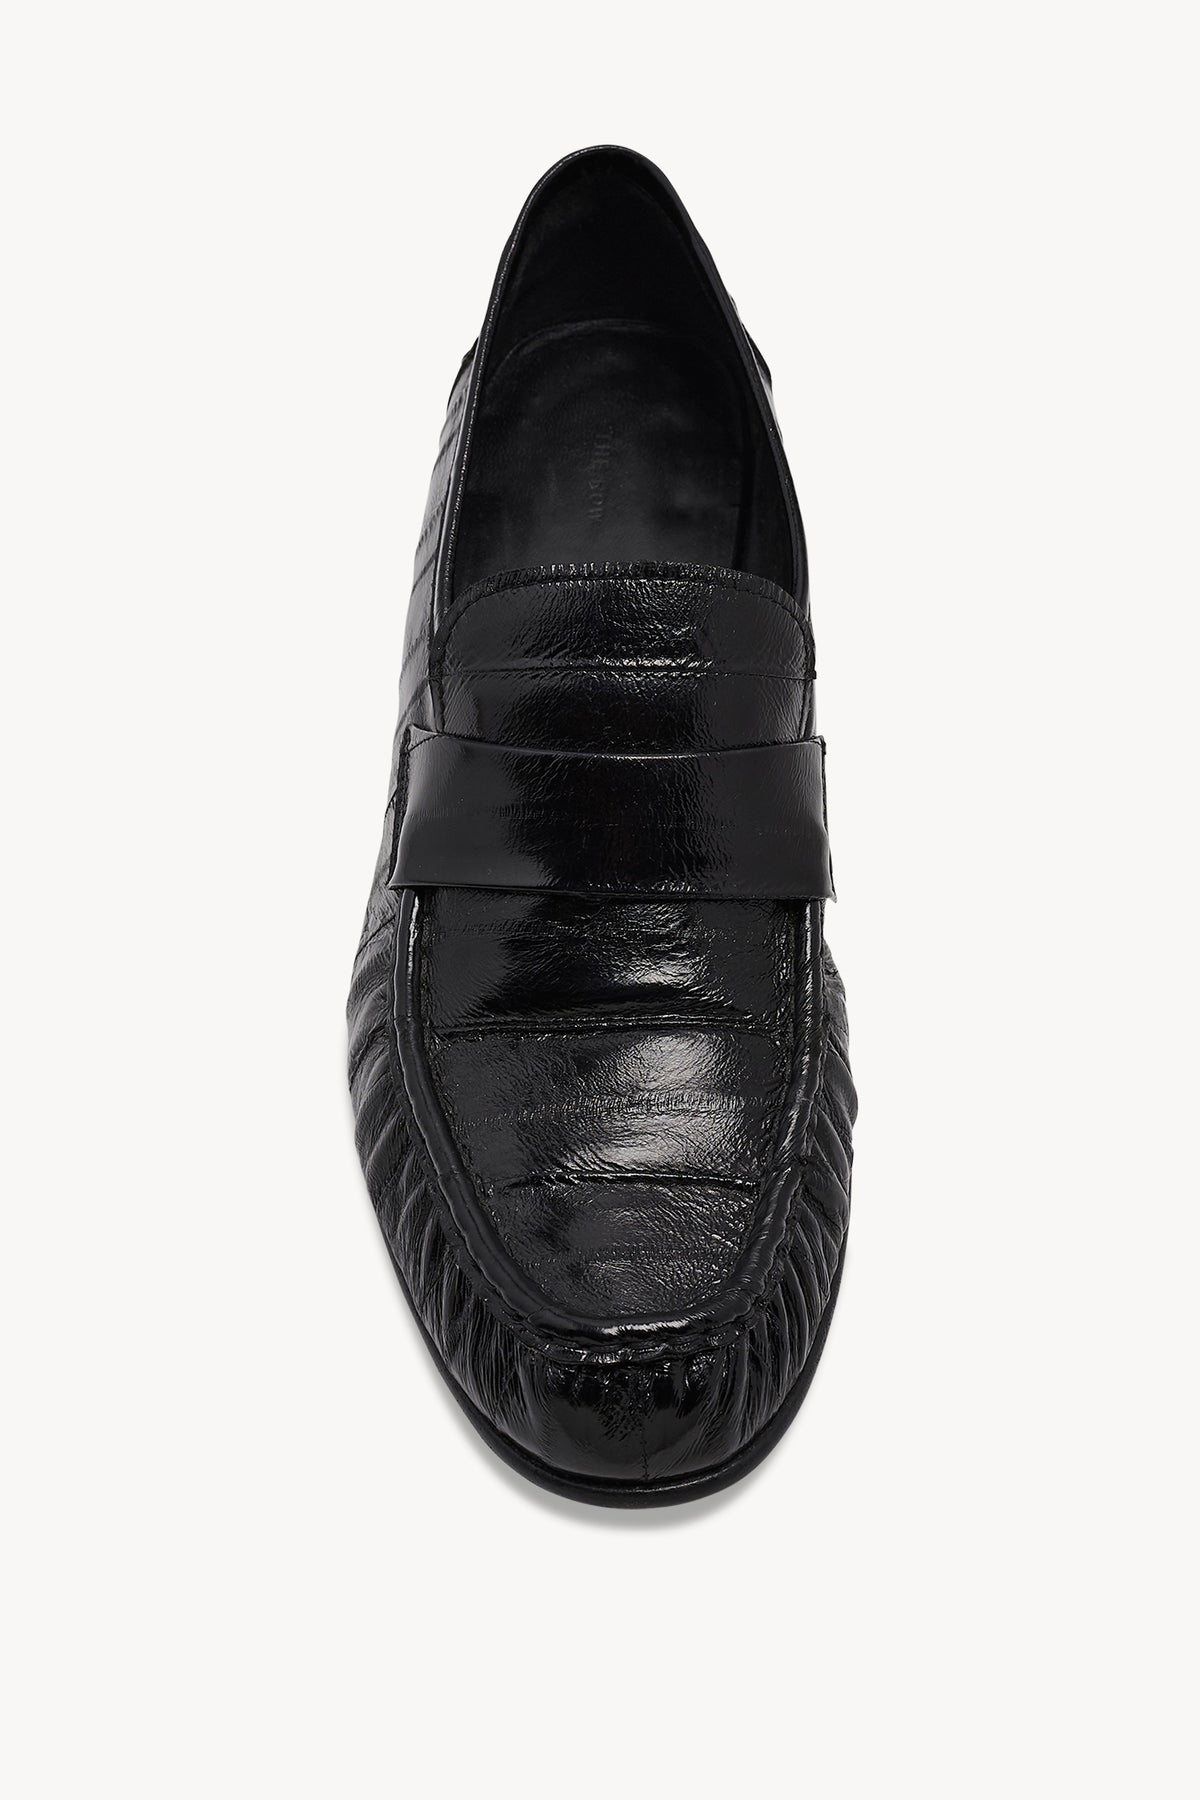 the-row-soft-loafer-in-eel-black-leather-amarees